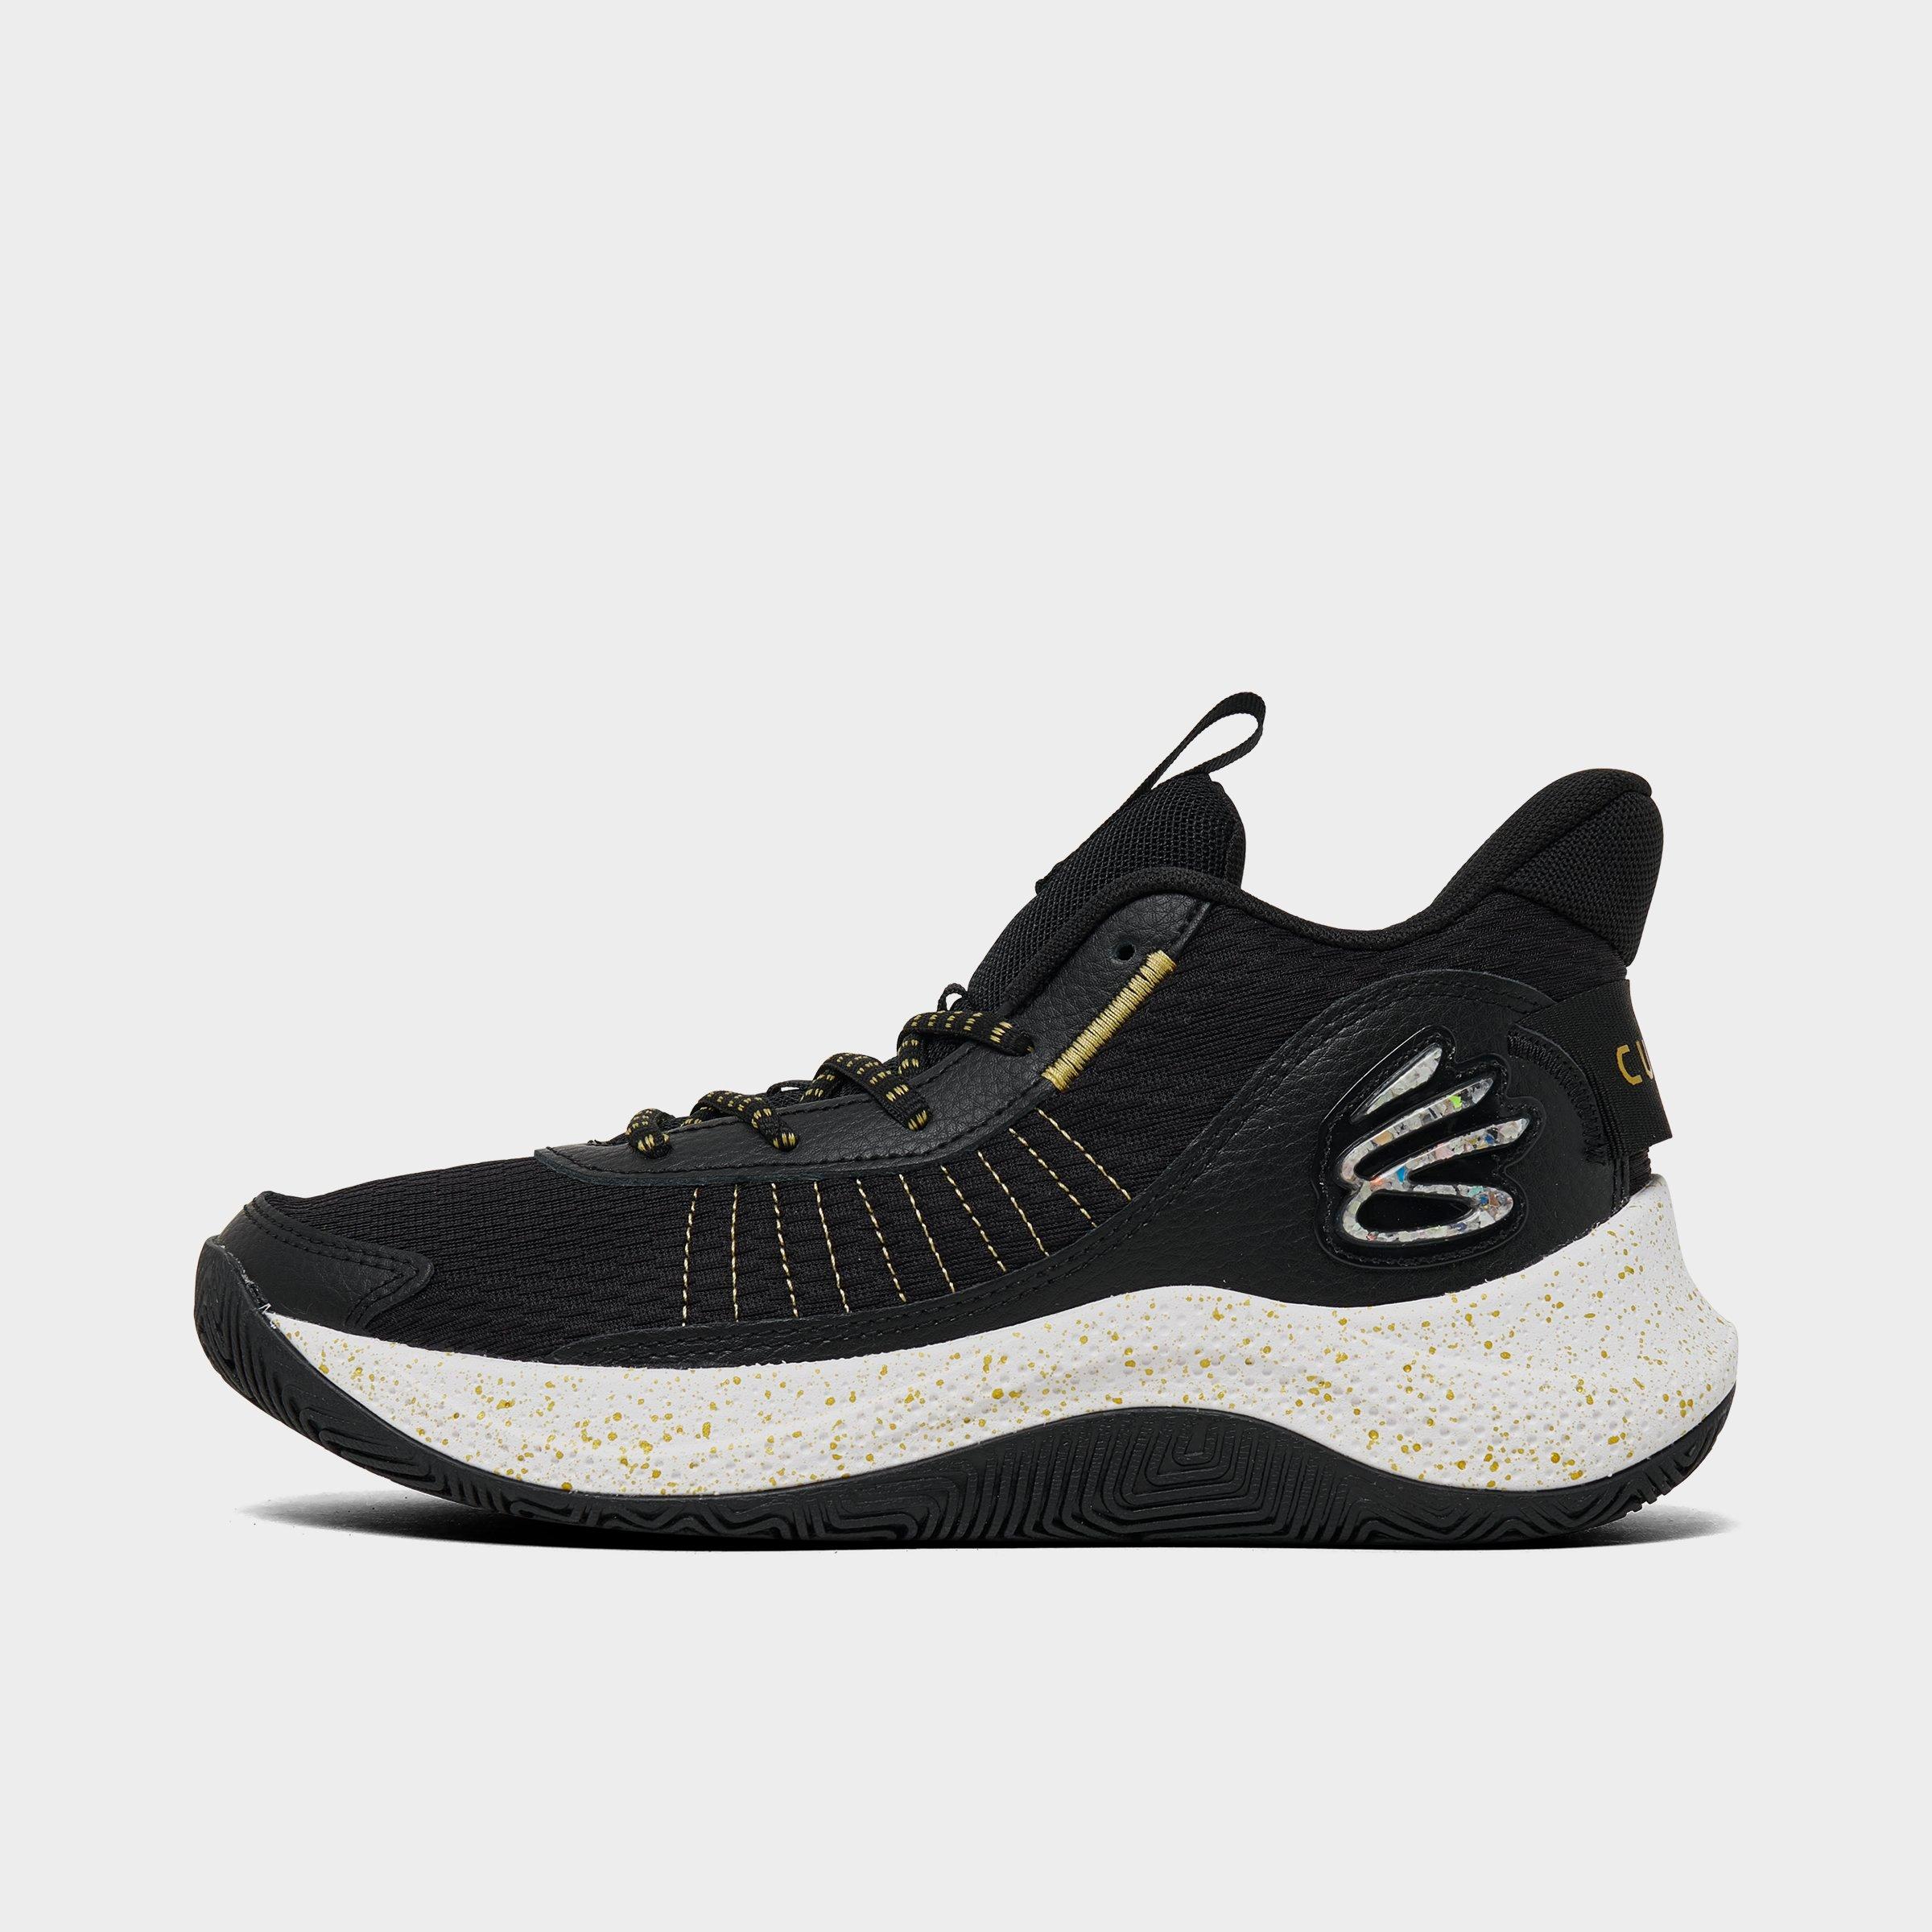 Under Armour Big Kids' Curry 3z7 Basketball Shoes In Black/black/metallic Gold